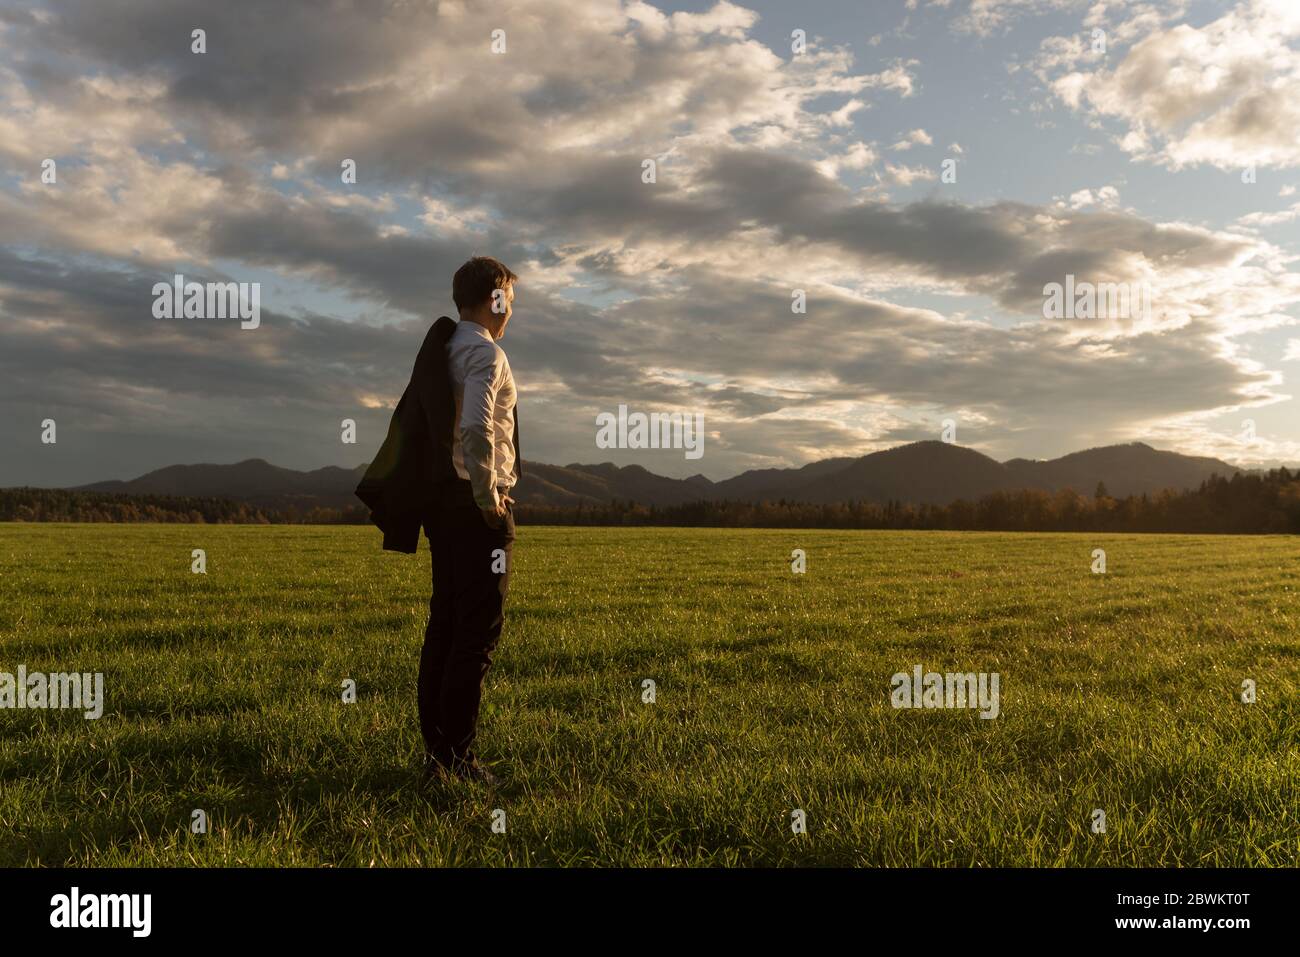 Young businessman with his suit jacket over the shoulder, standing in beautiful green meadow under dramatic evening sky gazing into the distance. Stock Photo